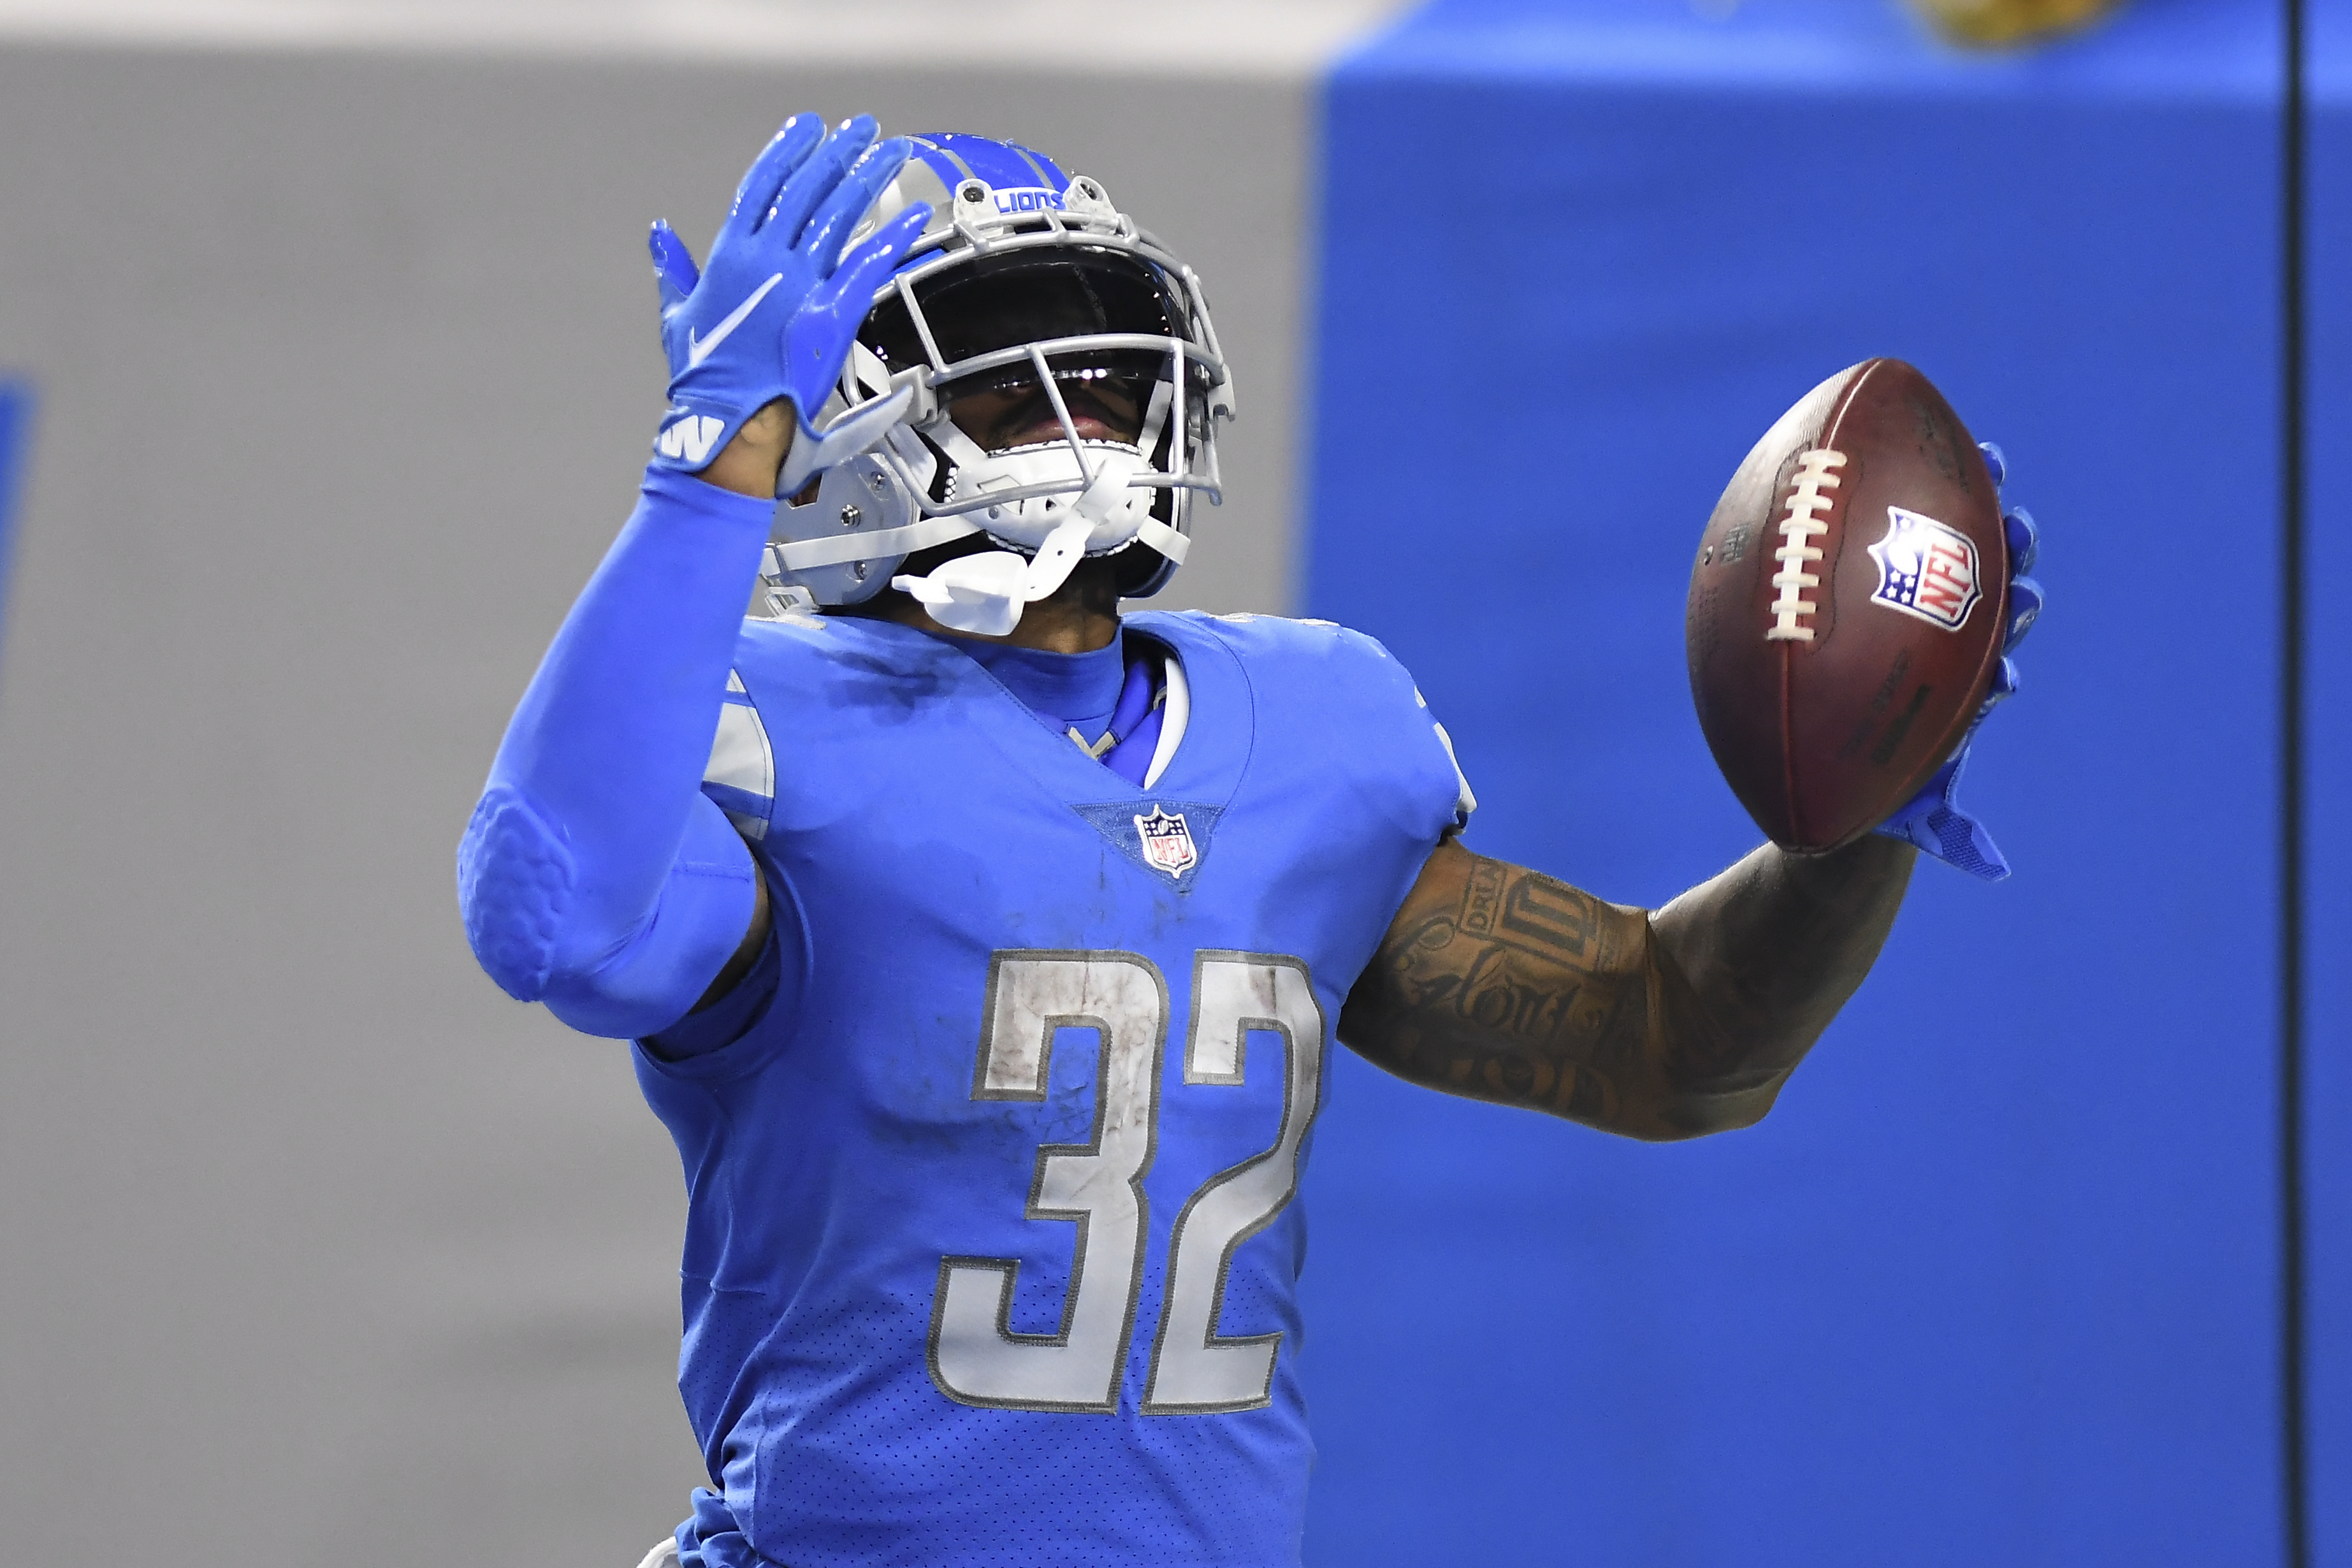 Detroit Lions vs. Green Bay Packers on Monday Night Football: Follow game  score and updates here